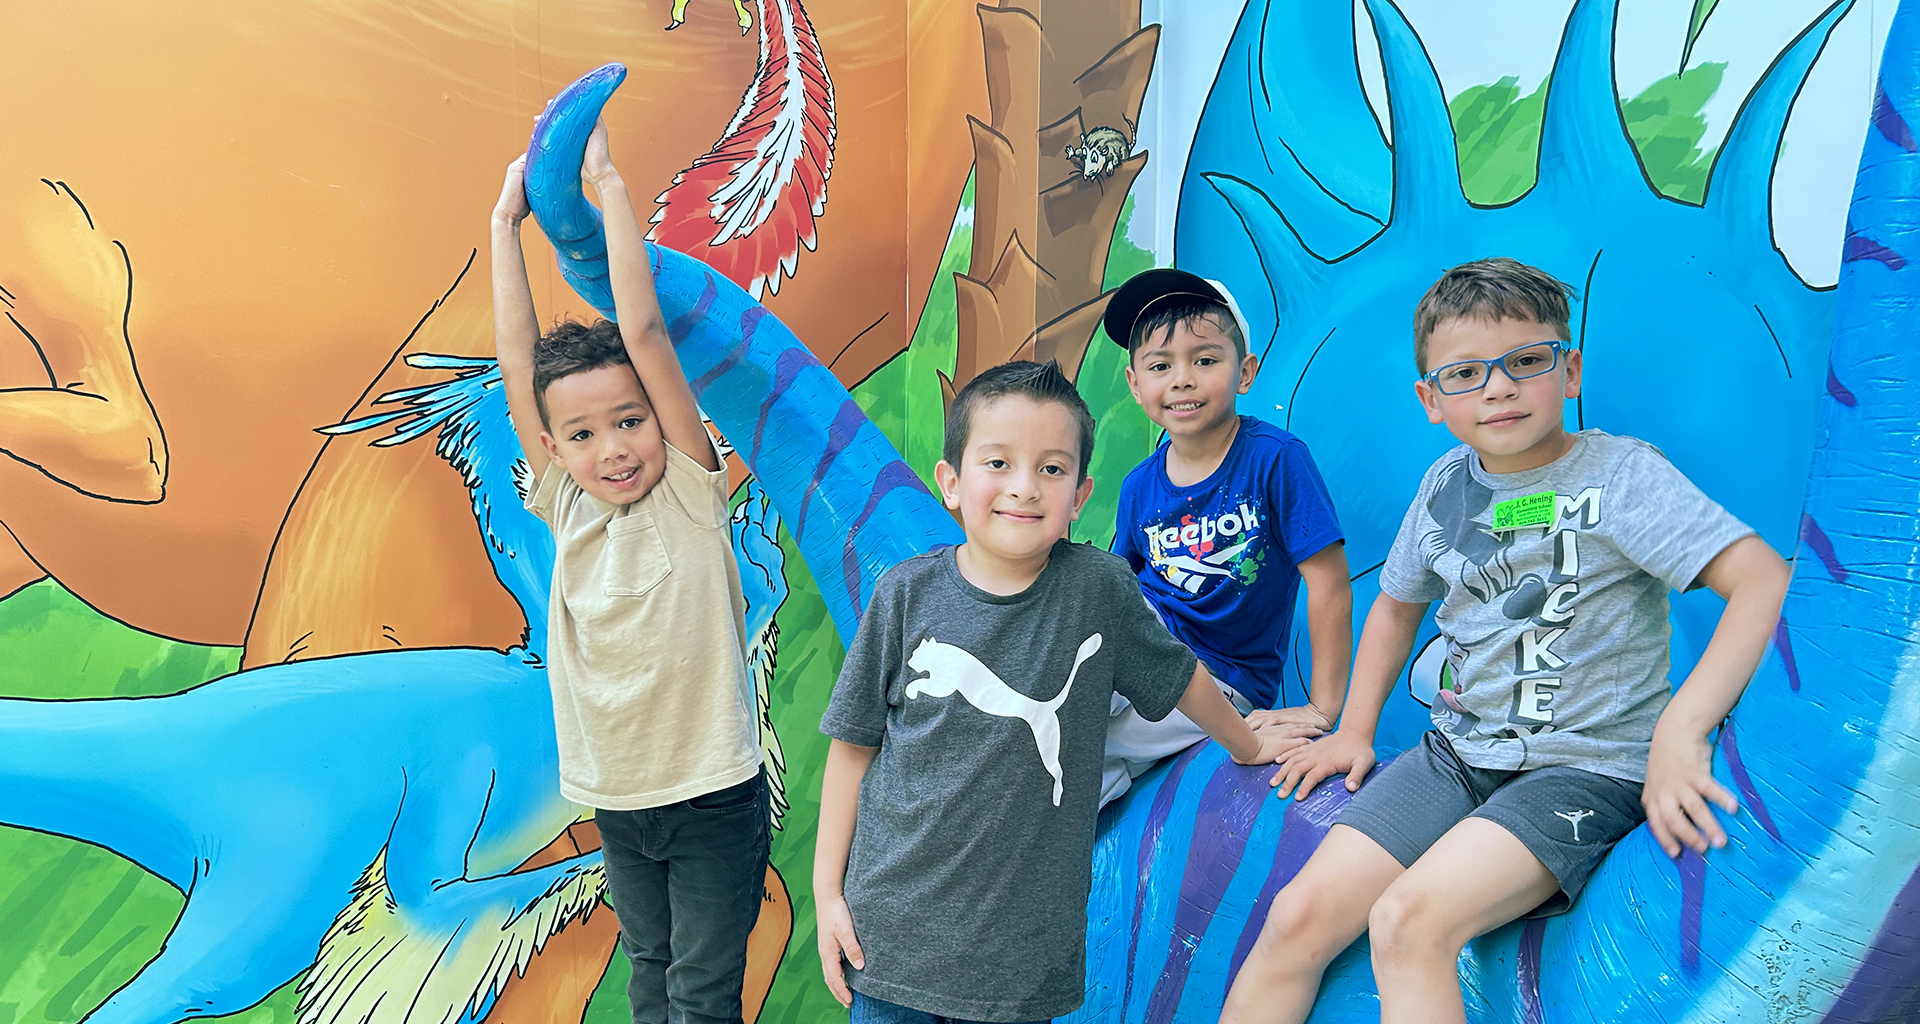 Four students pose in front of a mural.